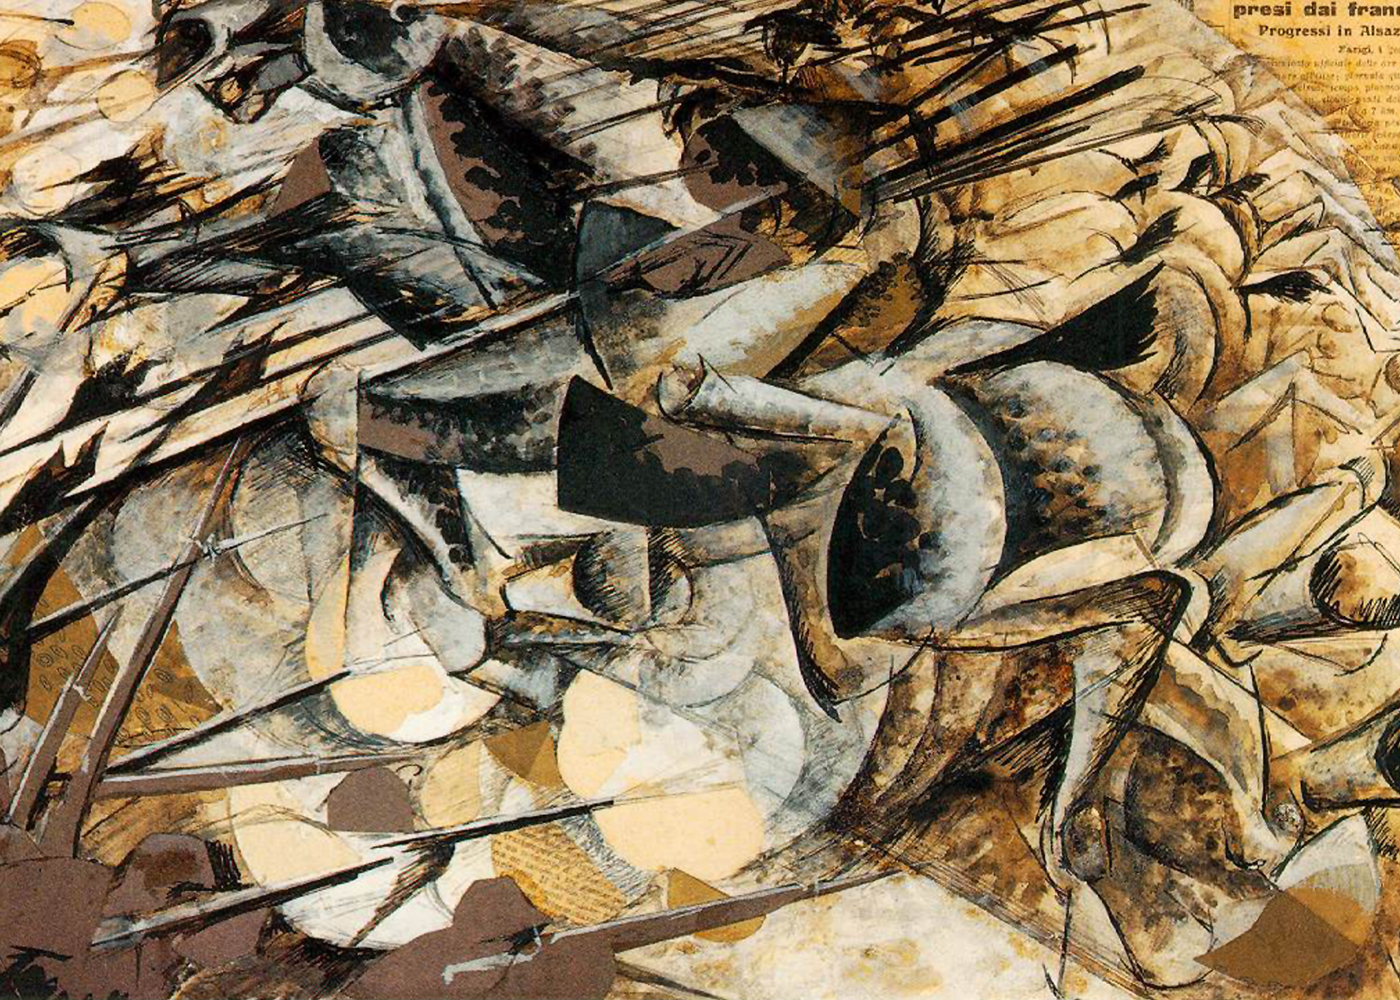 Charge of the Lancers by Umberto Boccioni - 1915 - 50 x 32 cm private collection